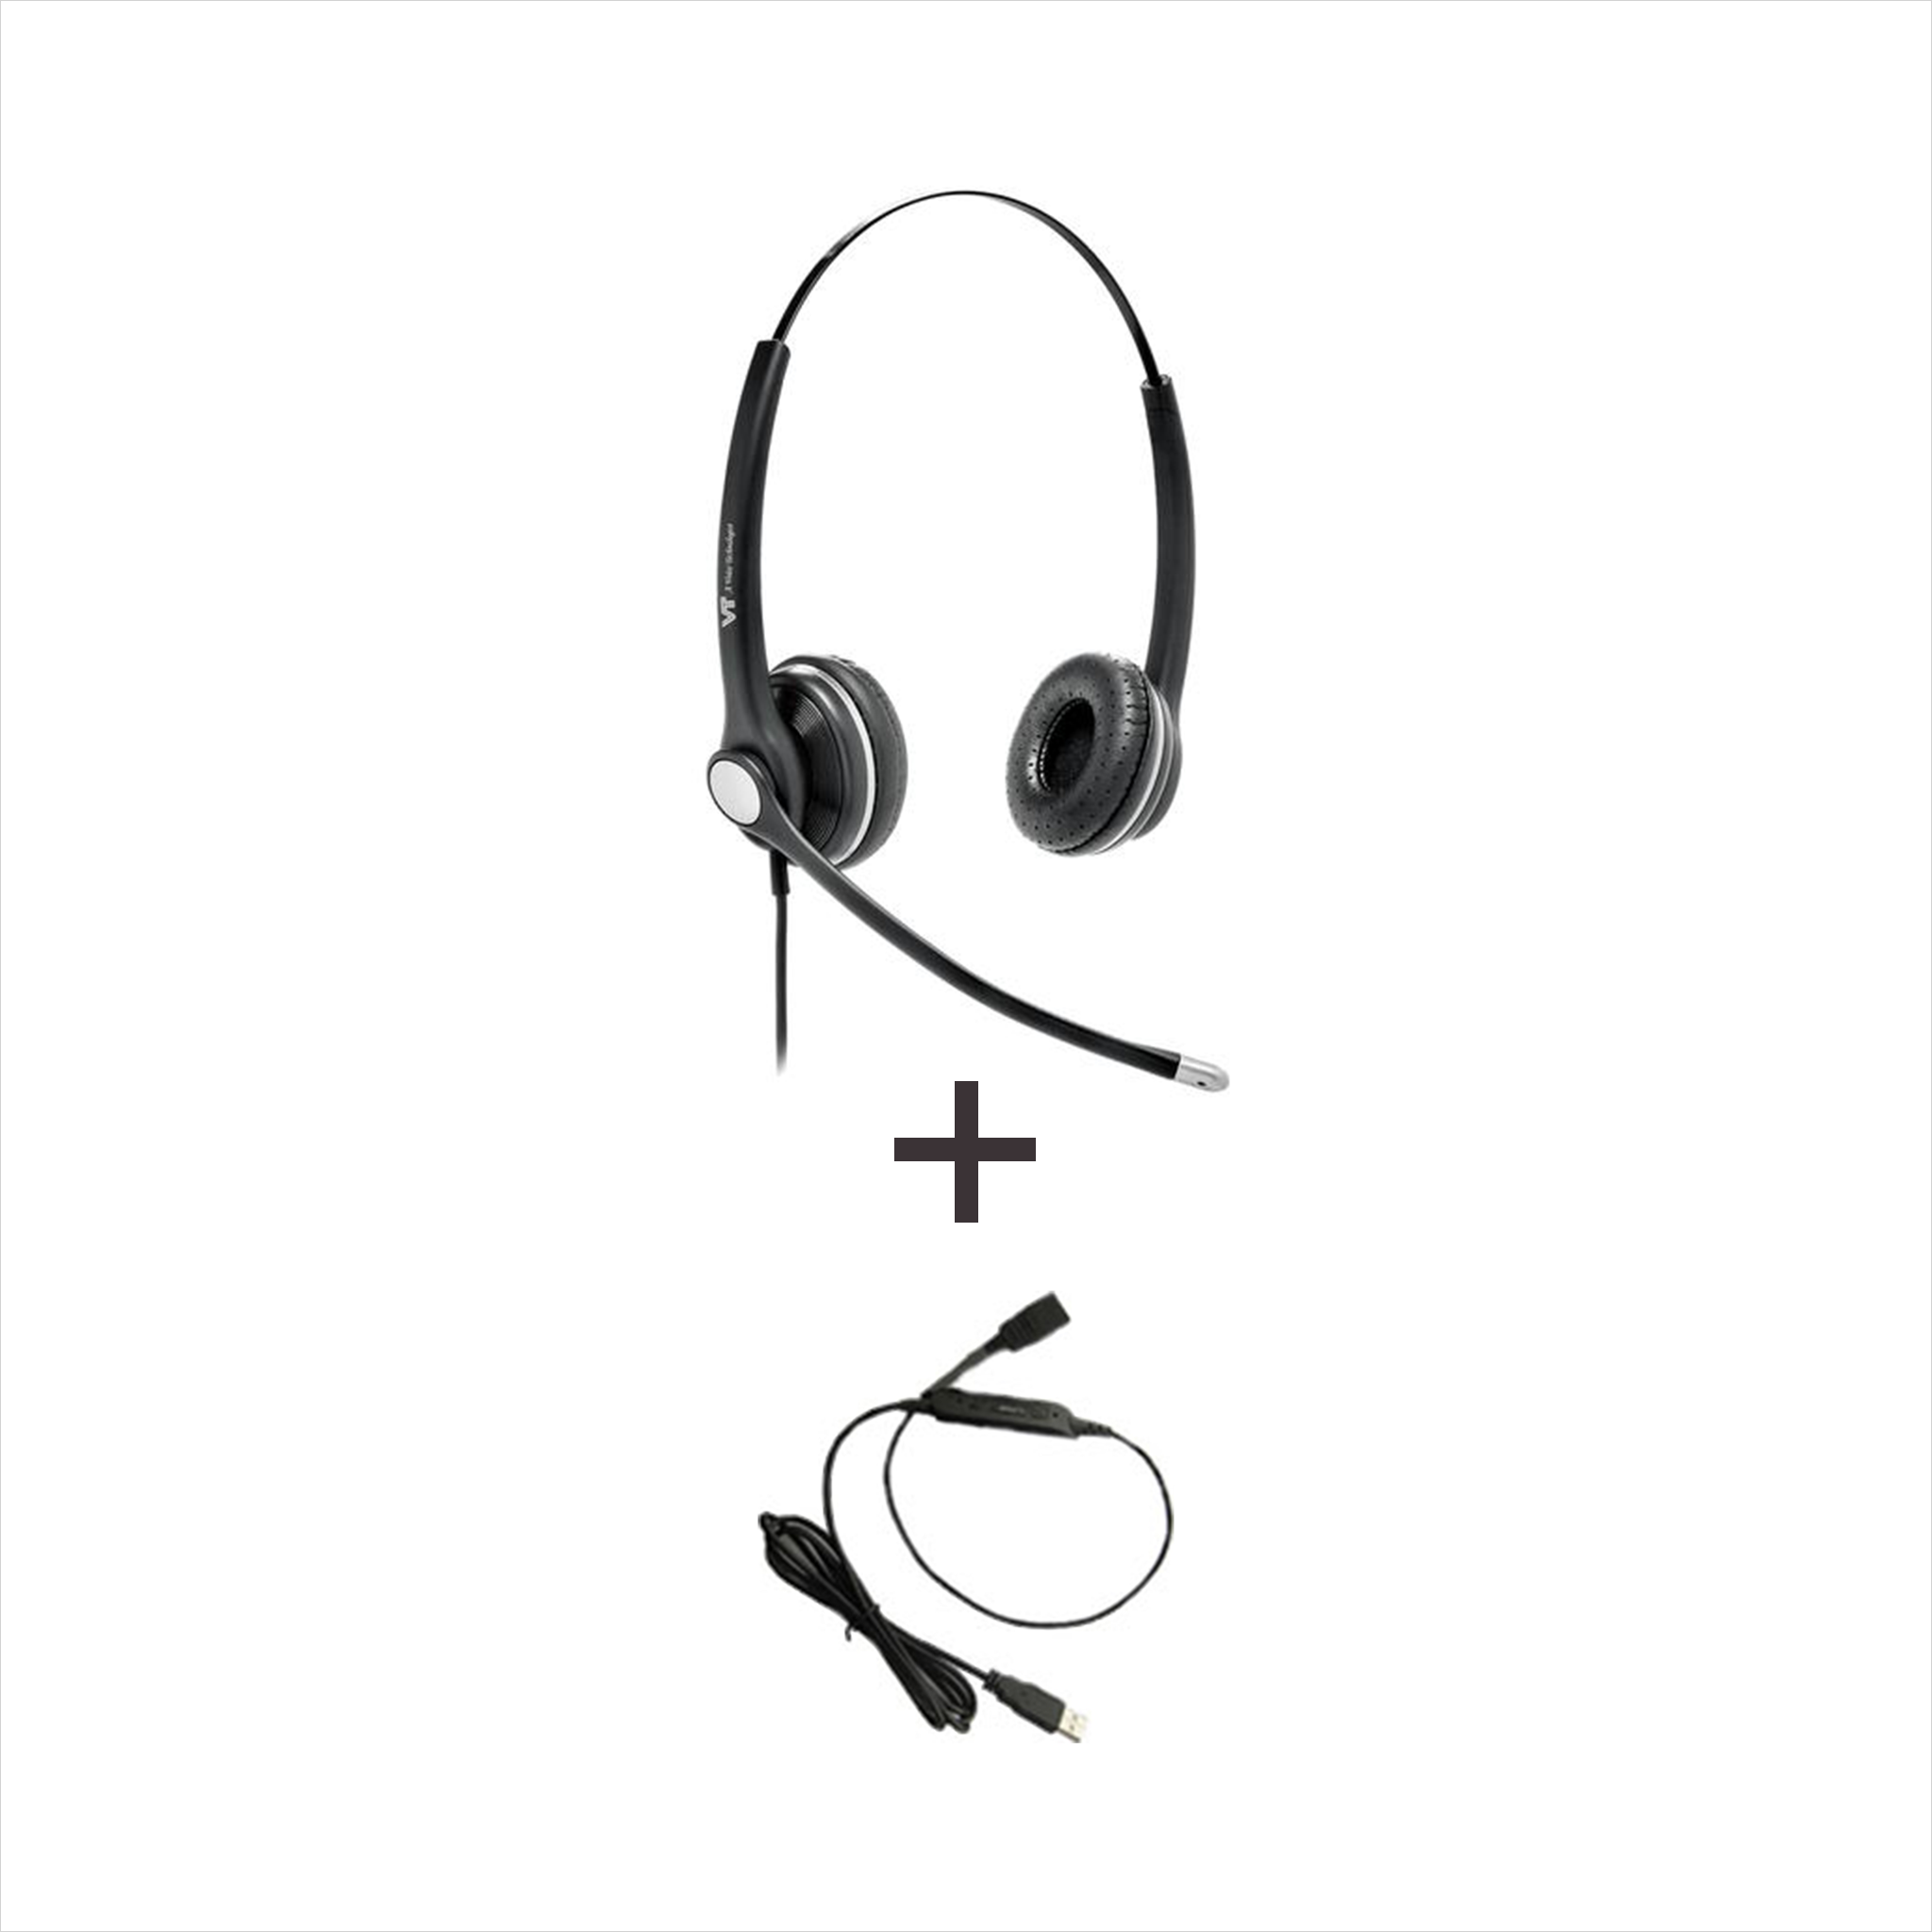 VT8000 Headset - VBeT Wired headset VT8000 Duo UNC | AL-VoIP Store+ Qd-Usb Plug(03) - Headsets